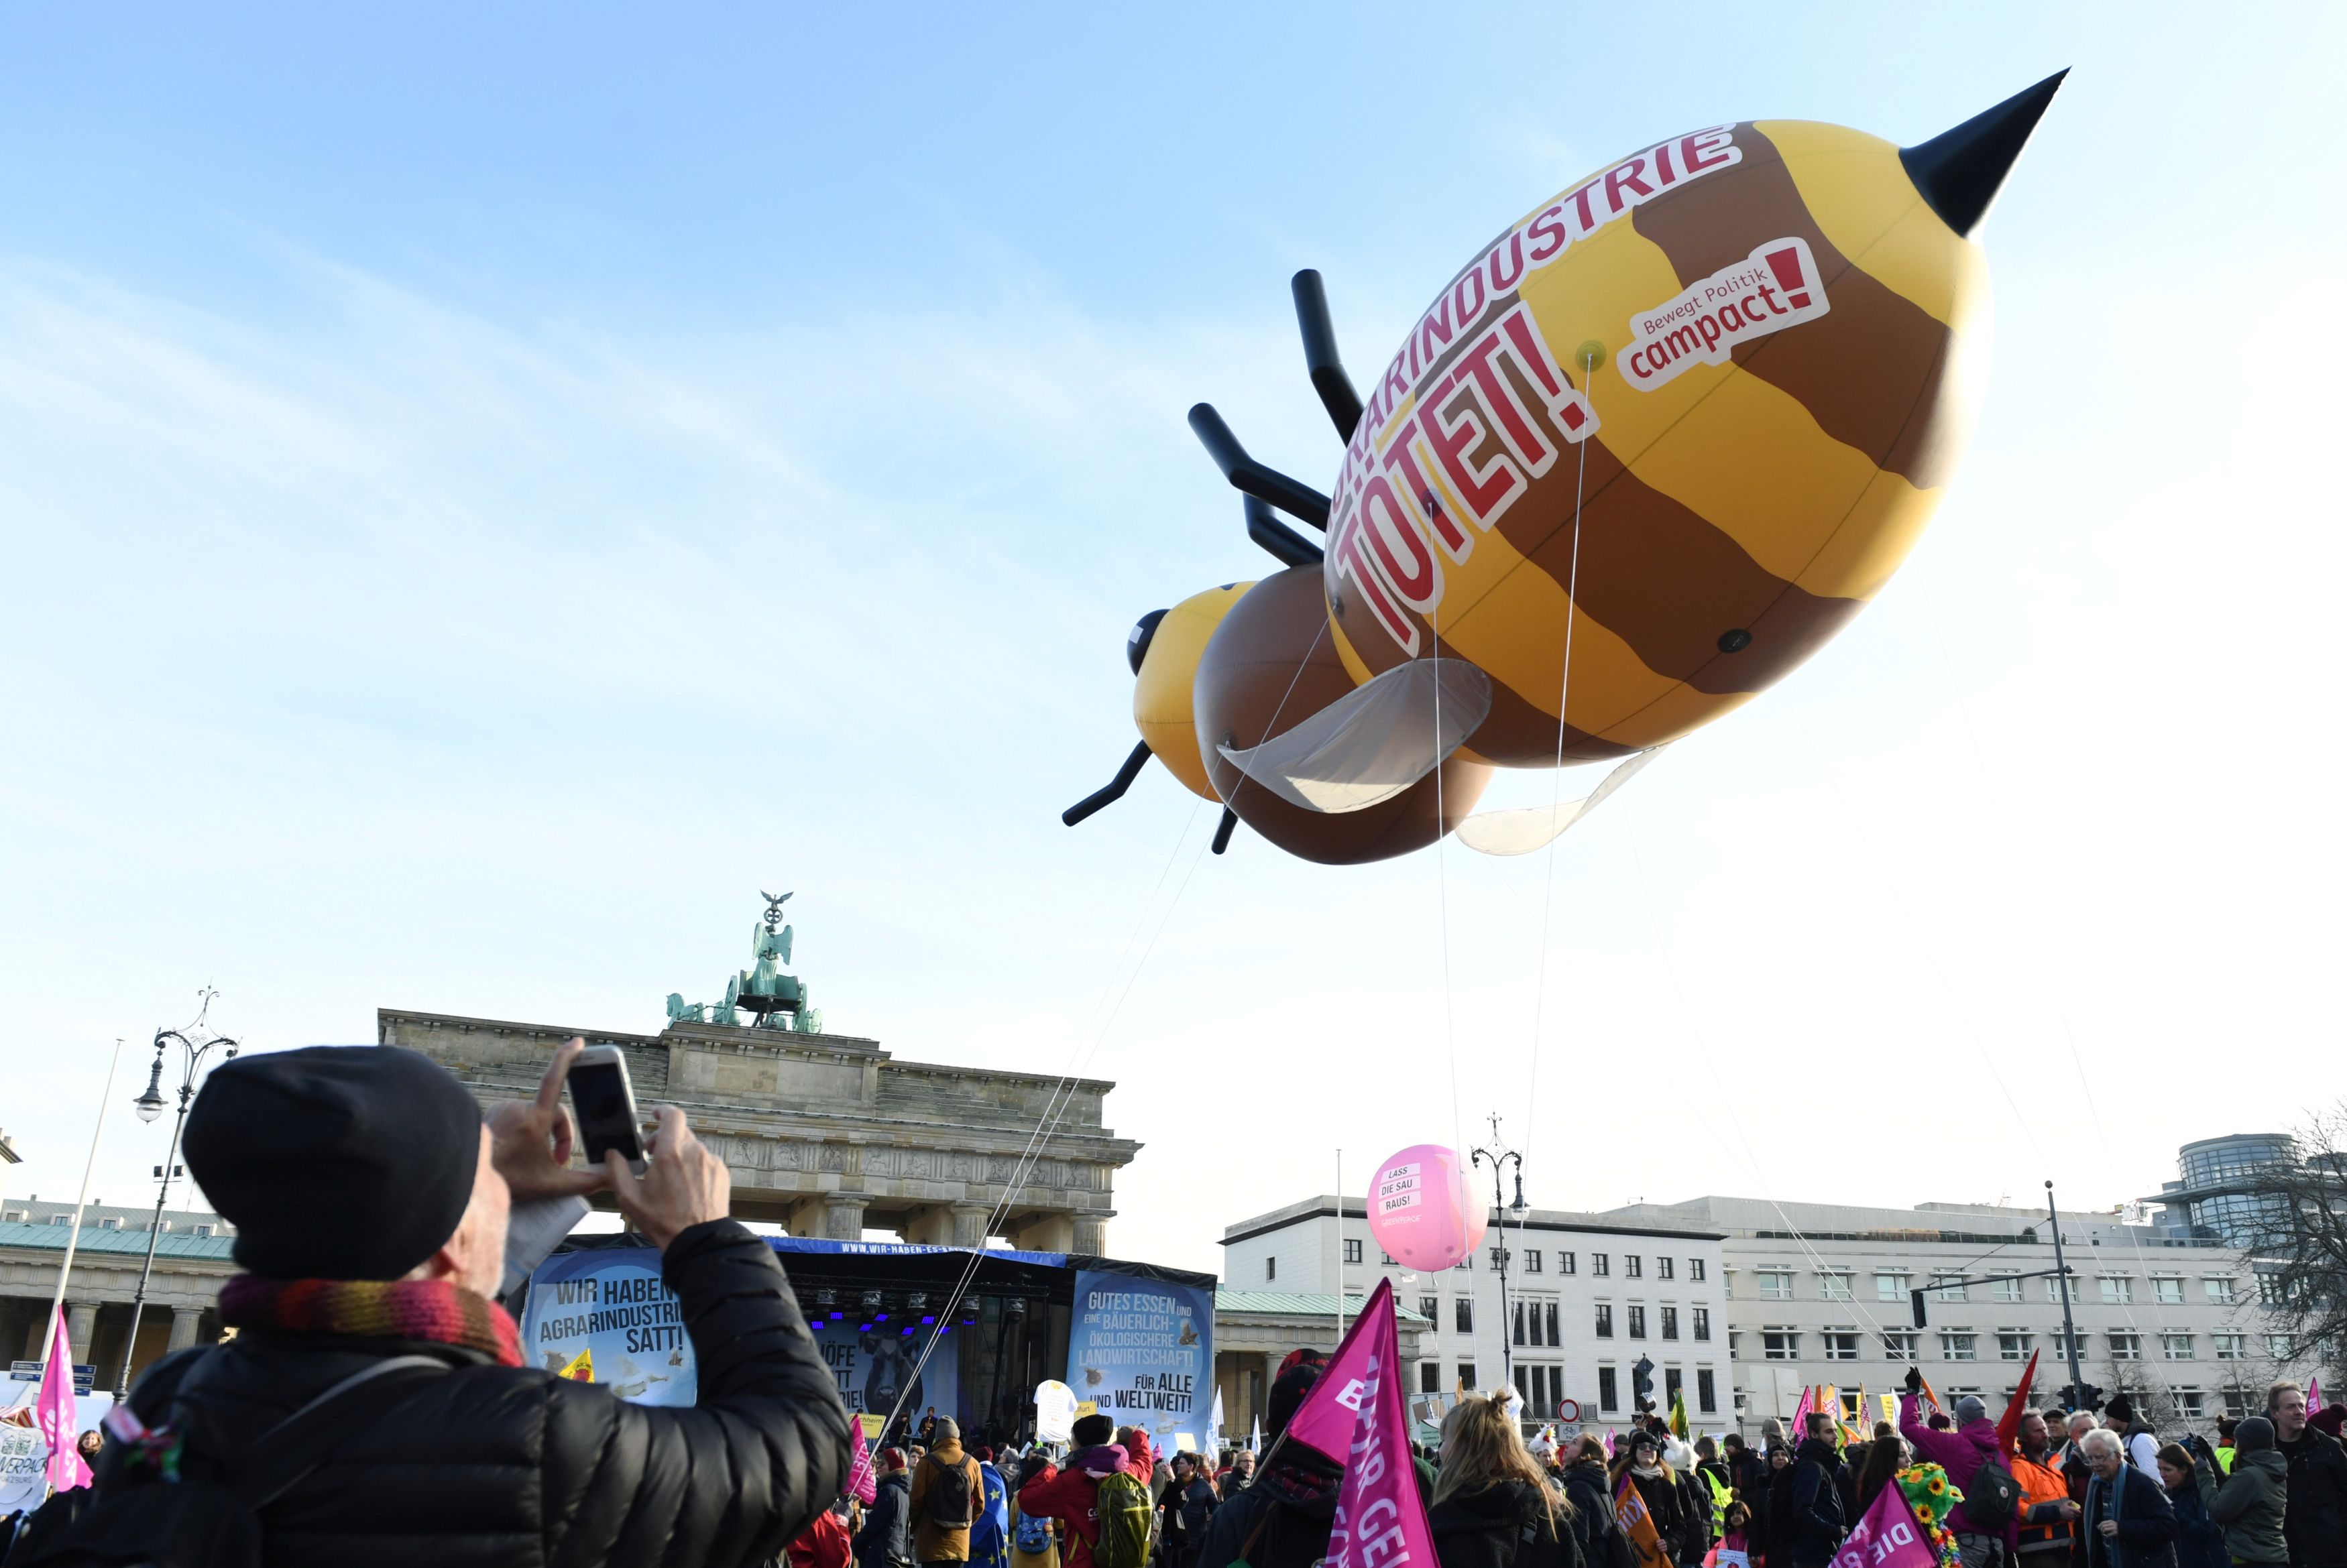 A bee balloon is seen during a demonstration against the government's agricultural policies at the start of the International Green Week agriculture and food fair in Berlin, Germany, January 18, 2020. REUTERS/Annegret Hilse